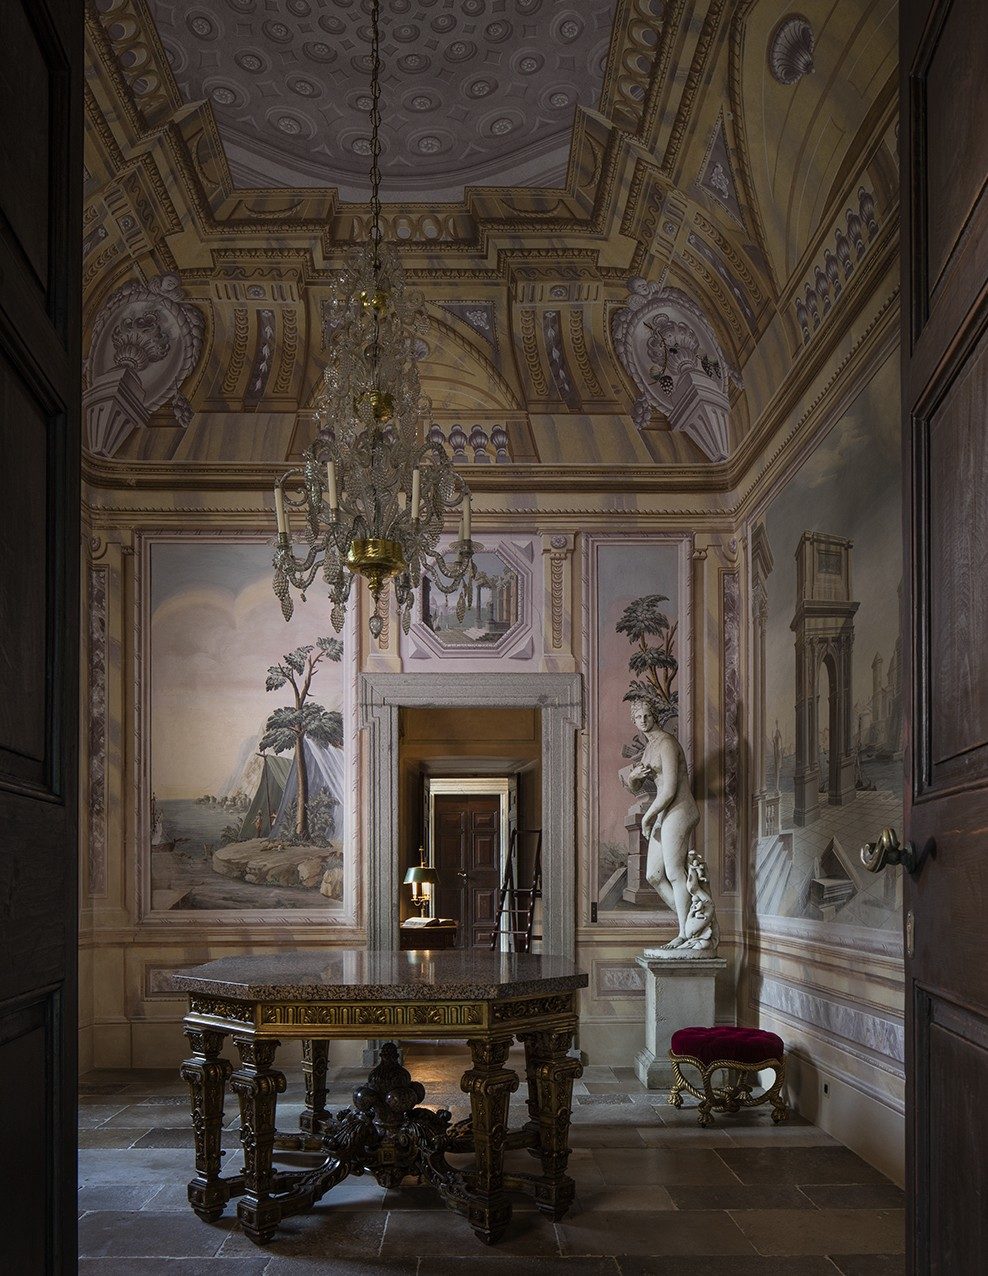 Villa Balbiano luxury private residence property Lake Como 17 century classic lavish best interiors antique collection Suites bedrooms accommodatiom living room marble statue e1573831729239